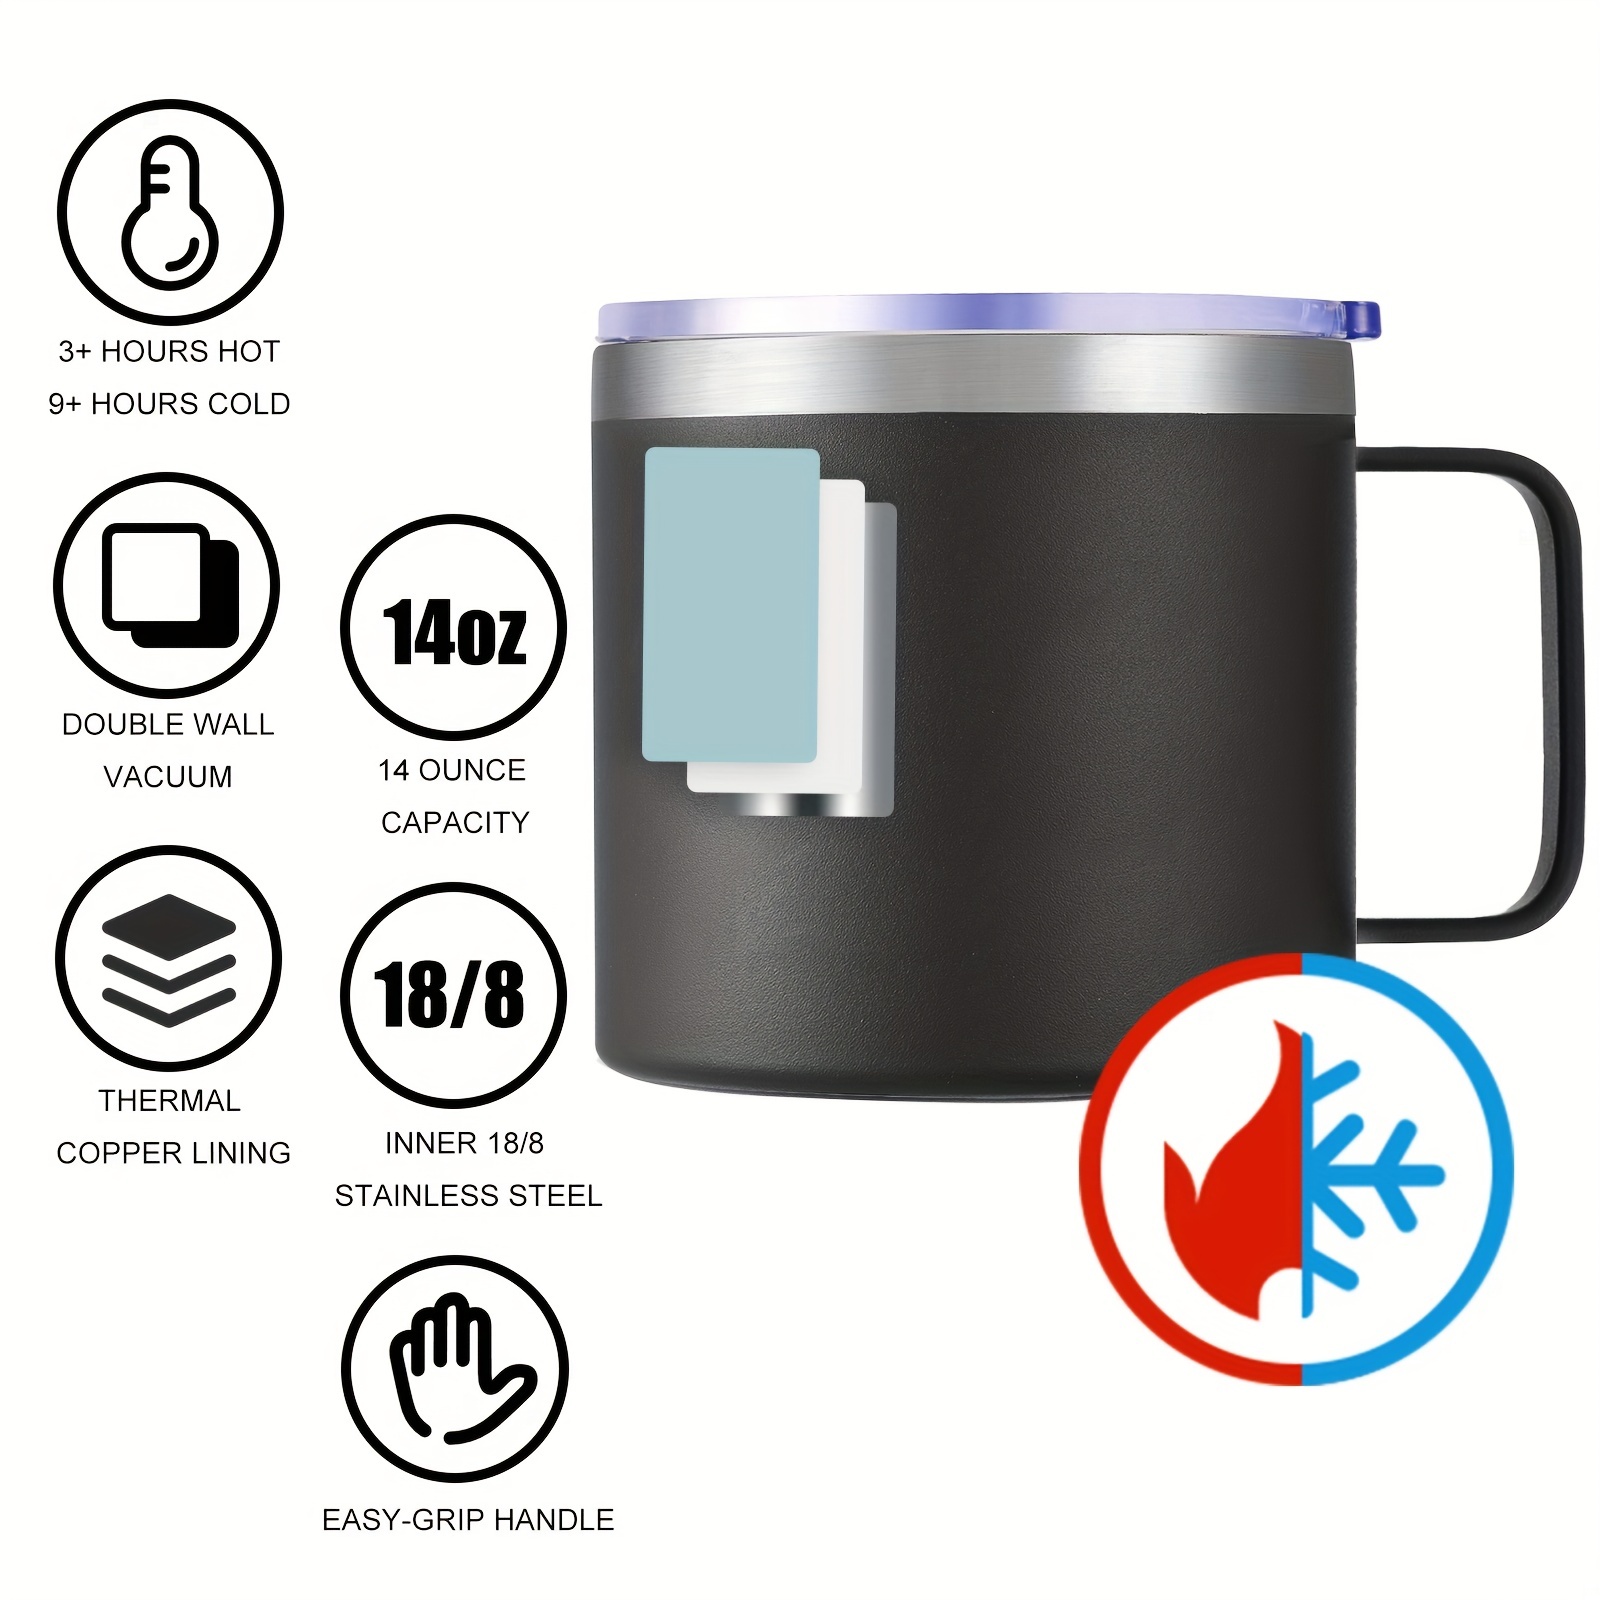 Travel Tumblers Stainless Steel Coffee Mug 20 oz BPA Free Double Wall Vacuum Insulated for Hot or Cold Beverages with Spill-Proof Slide Lid, Size: 1